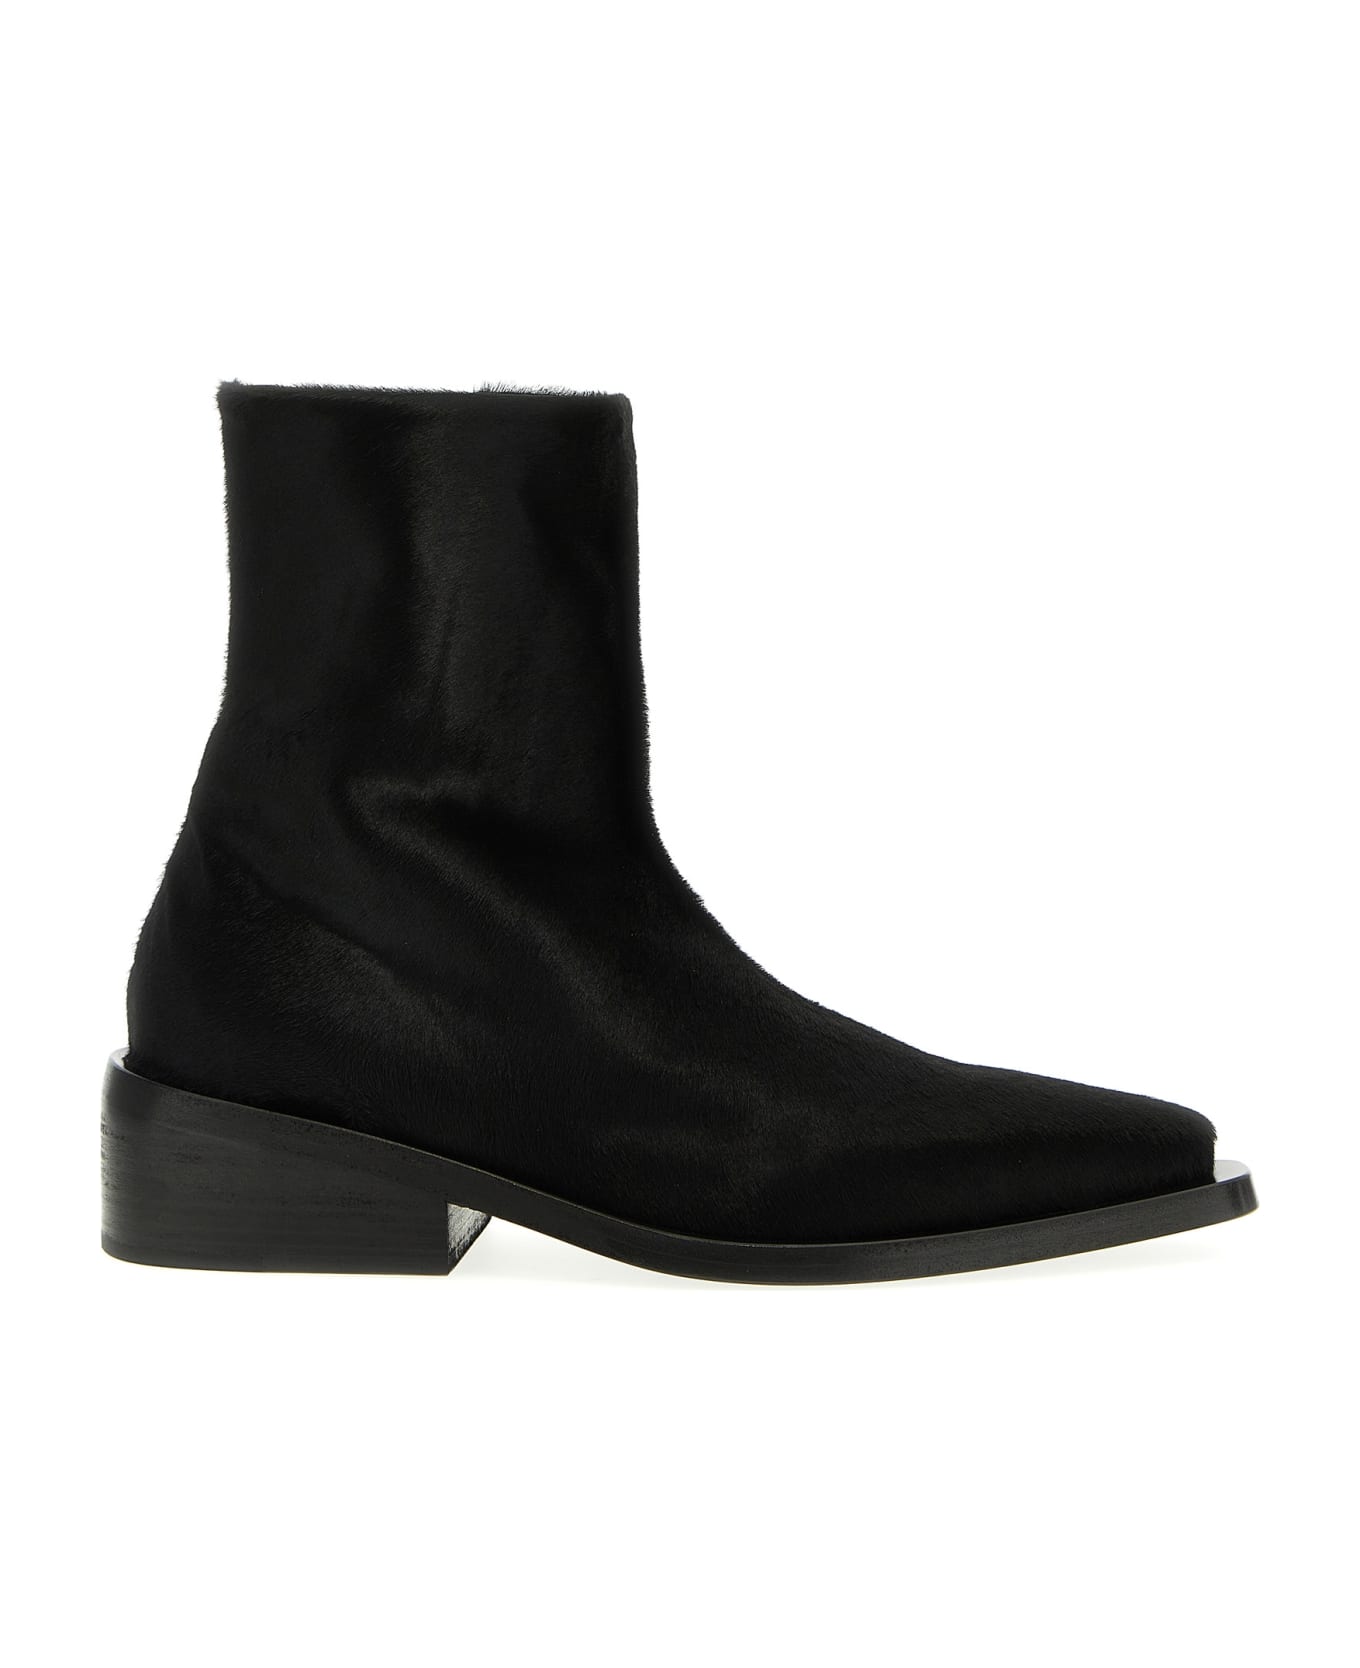 Marsell 'gessetto' Ankle Boots - Black   ブーツ